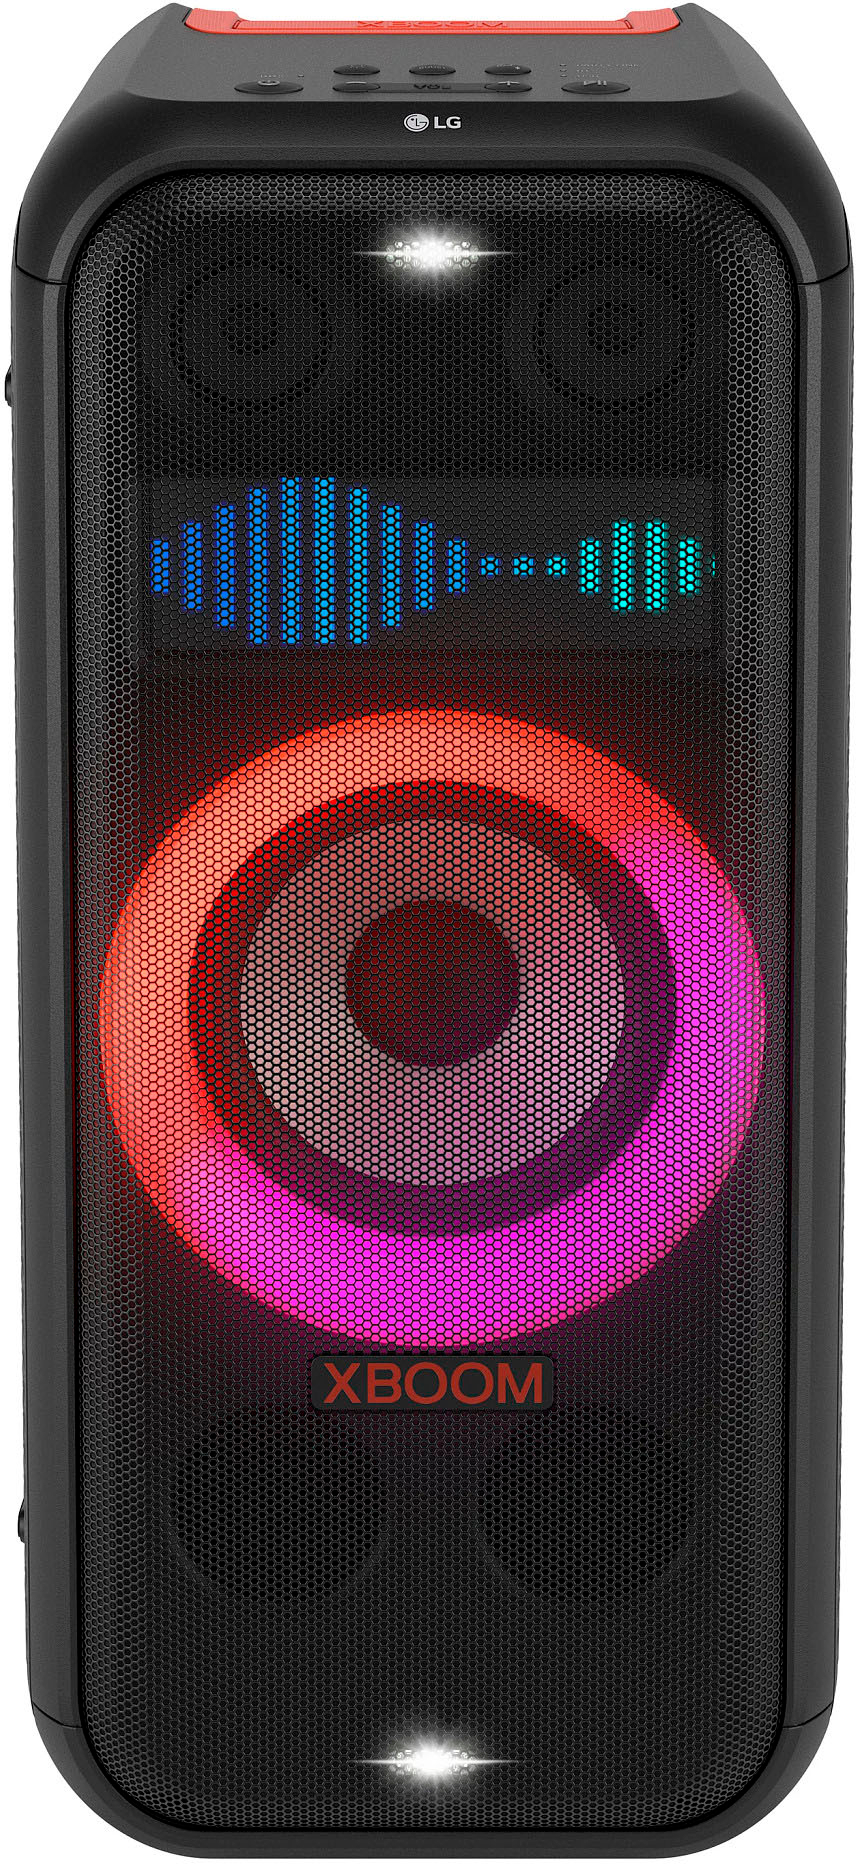 LG XBOOM XL7 Portable Tower Party Speaker with Pixel LED Black 